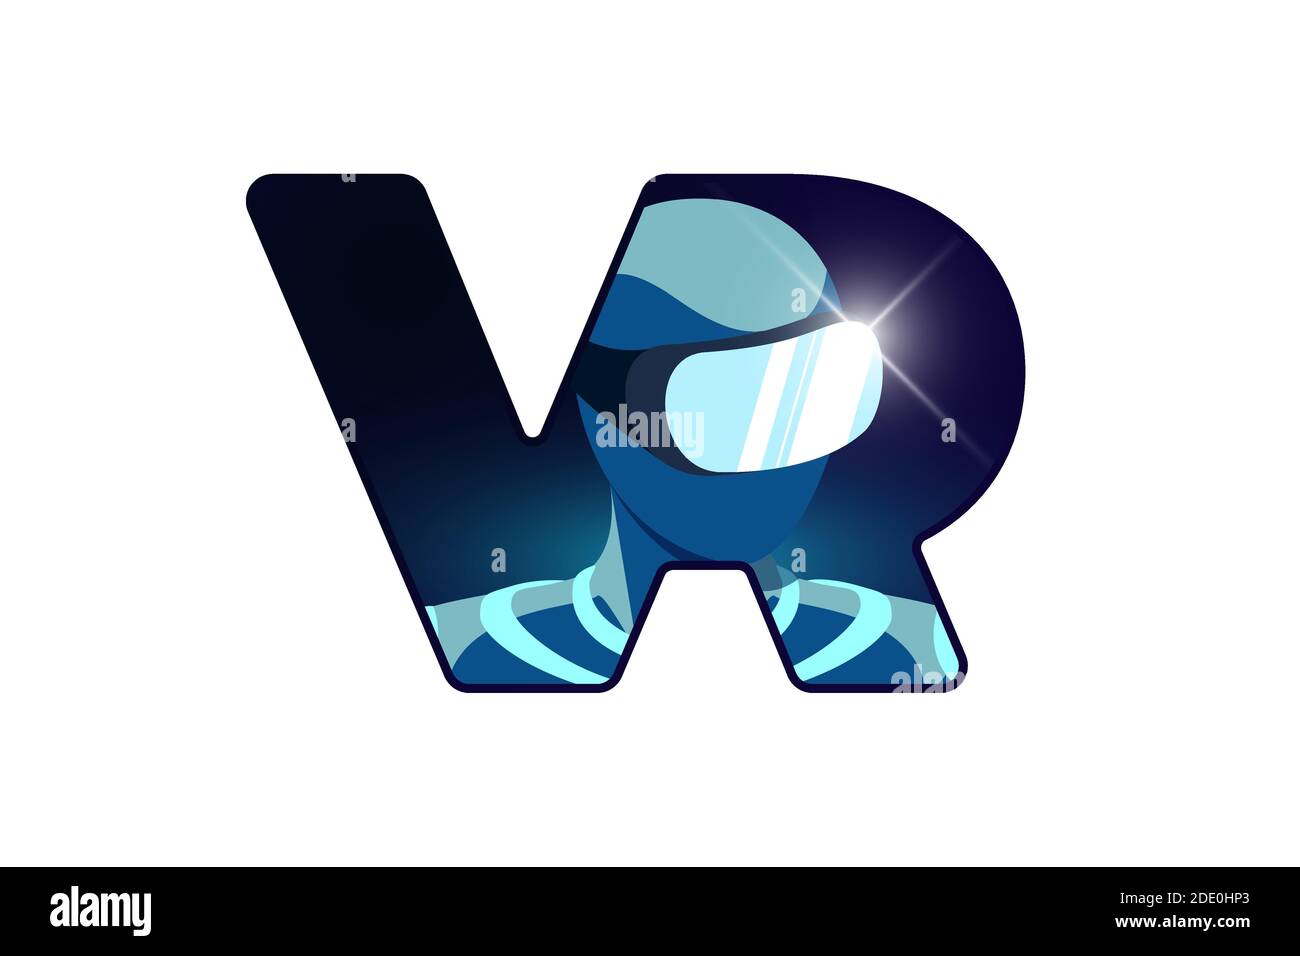 VR logo design concept. Person wearing virtual or augmented reality glasses helmet inside V R letters logotype. Futuristic technology simulator vector Stock Vector